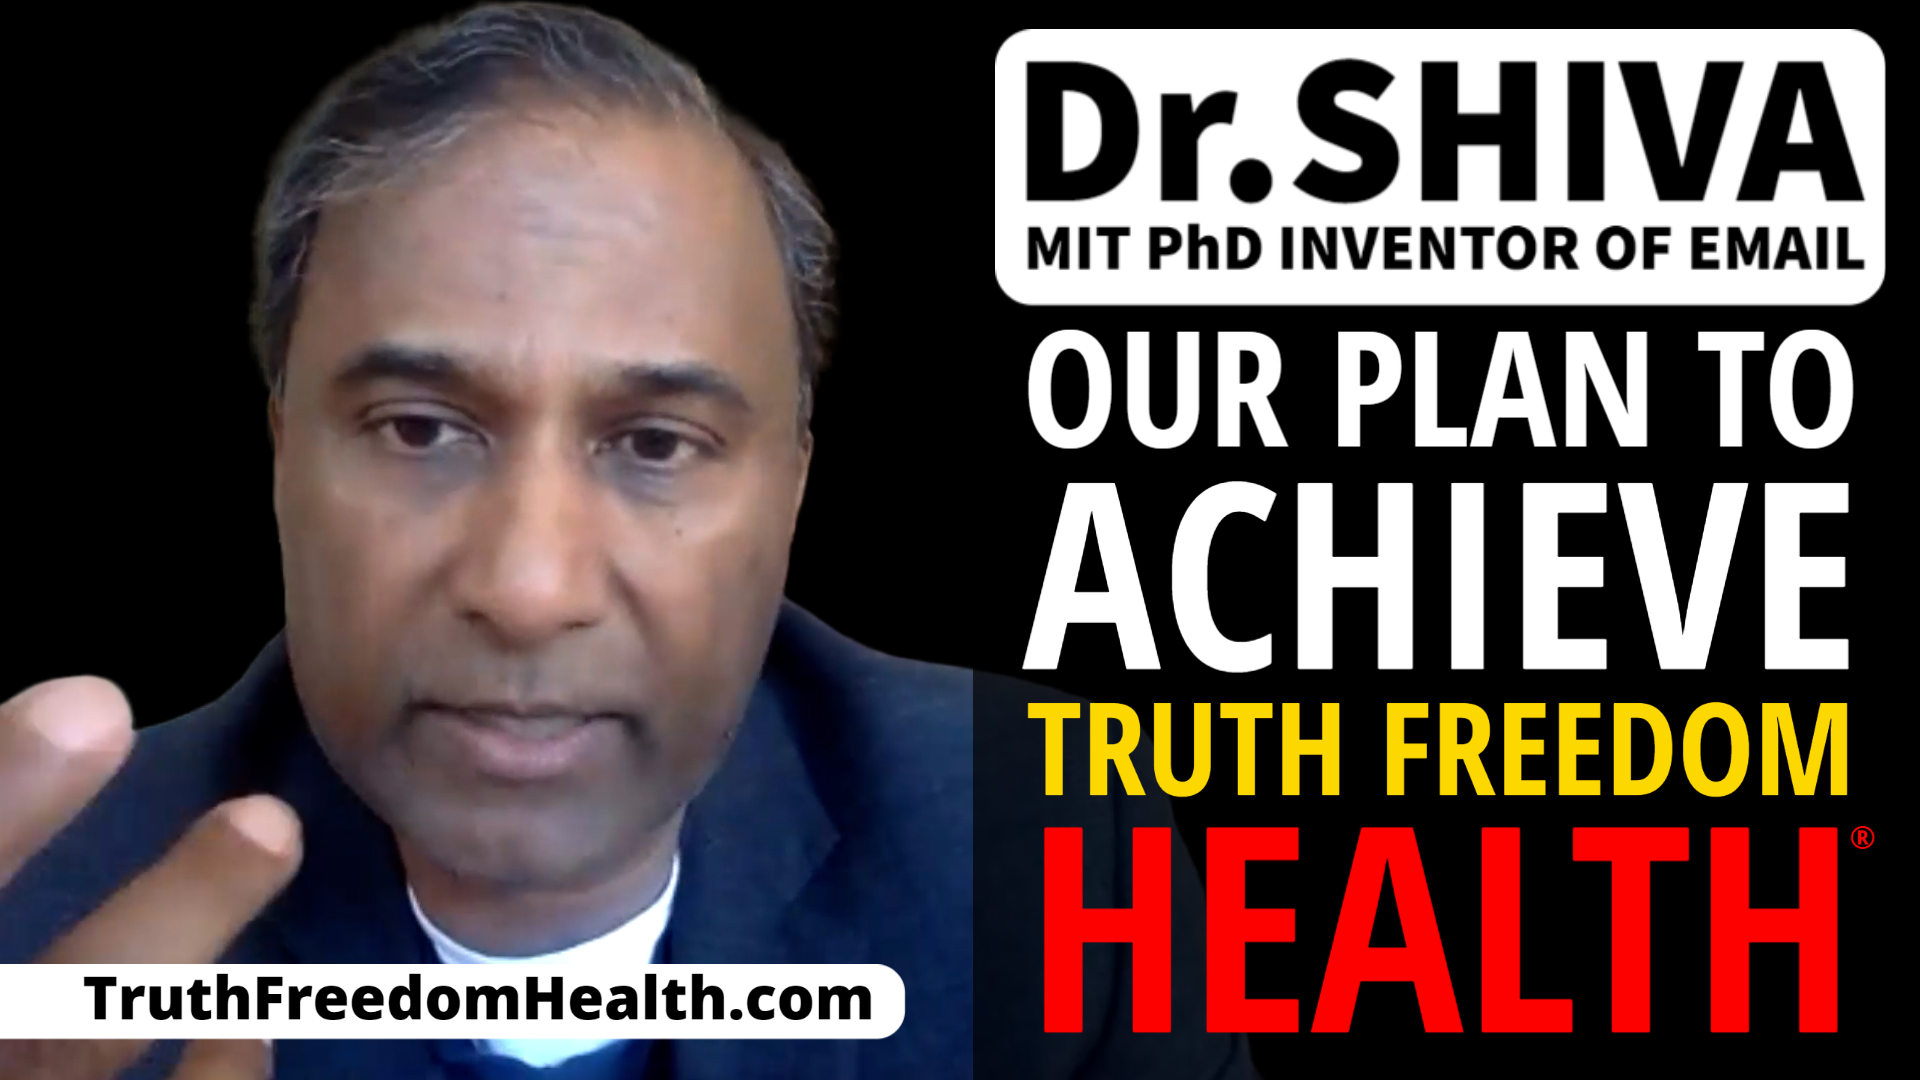 Dr.SHIVA: Our Plan to Achieve Truth Freedom Health®